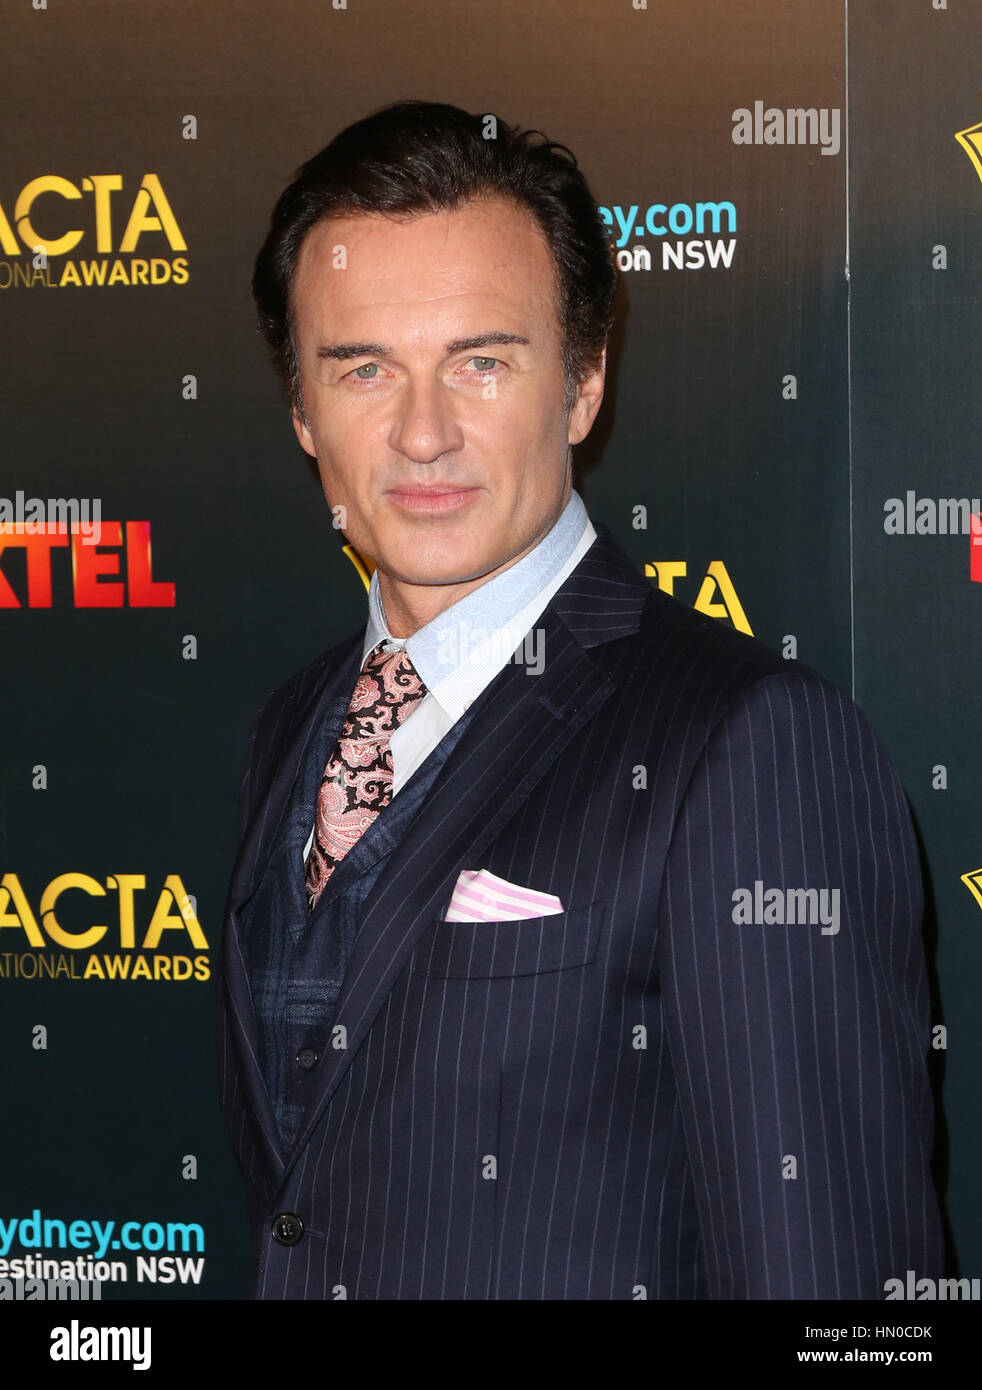 AACTA International Awards 2017 held at The Avalon Hollywood  Featuring: Julian McMahon Where: Hollywood, California, United States When: 06 Jan 2017 Credit: FayesVision/WENN.com Stock Photo